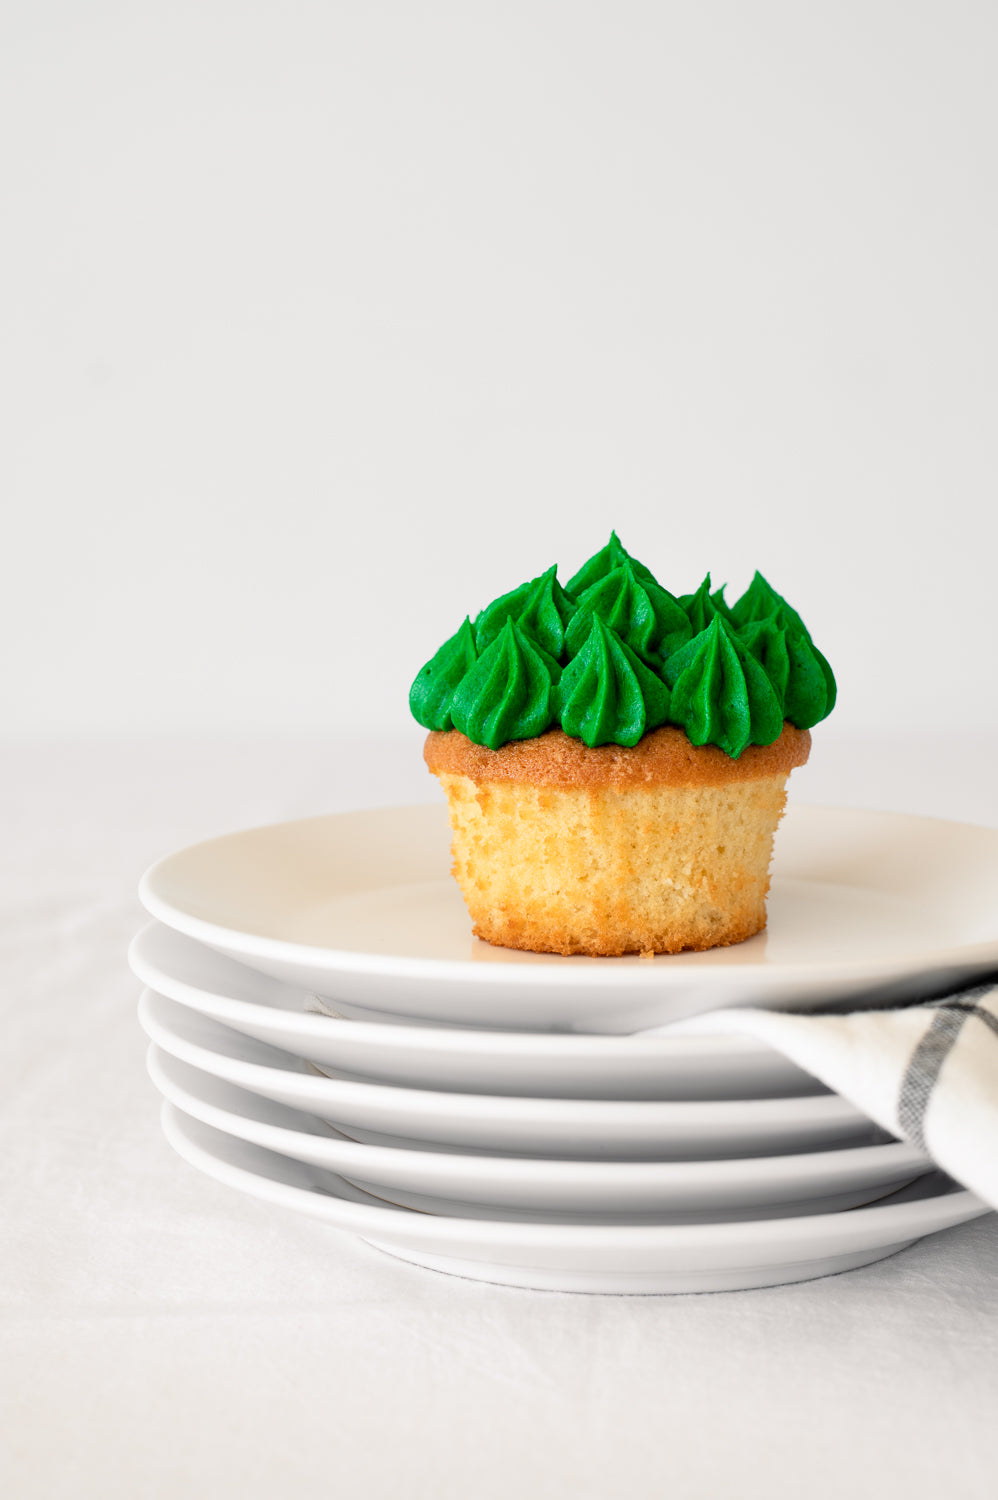 A stack of plates holding a vanilla cupcake with green piped icing